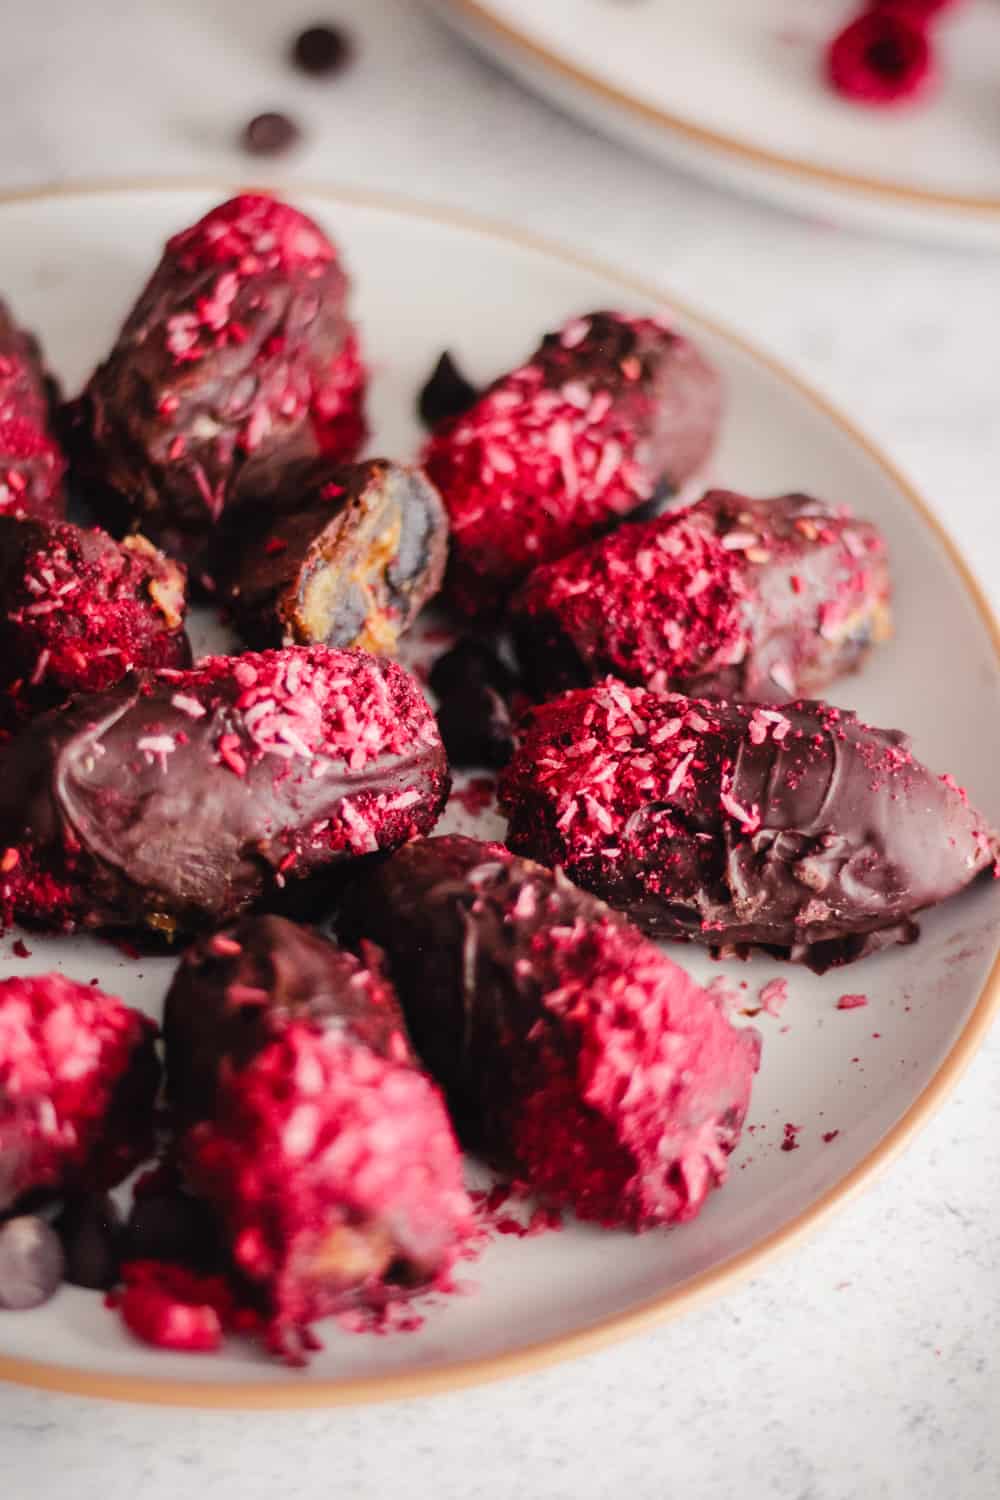 Dates covered in chocolate with raspberry and coconut powder.